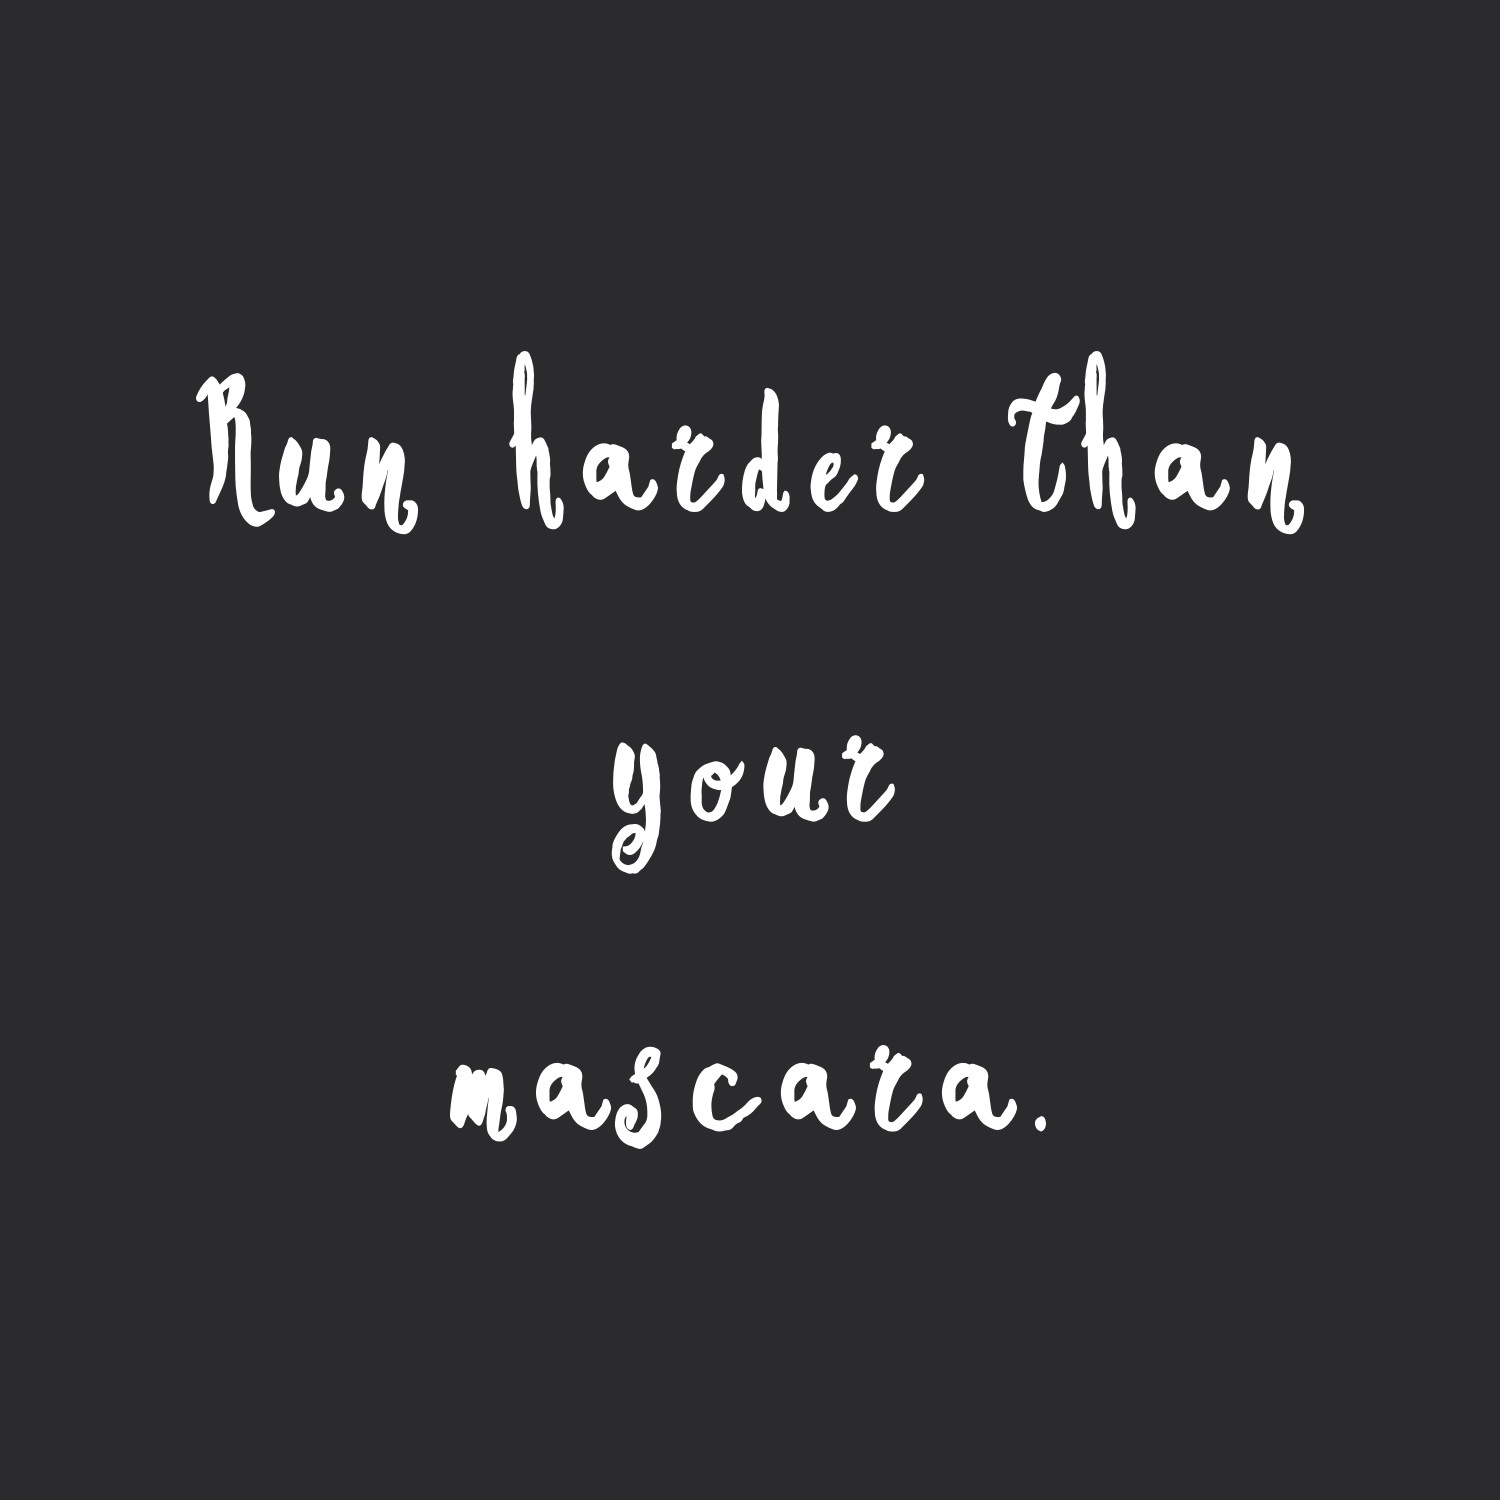 Run harder than your mascara! Browse our collection of exercise and healthy eating inspirational quotes and get instant fitness and weight loss motivation. Transform positive thoughts into positive actions and get fit, healthy and happy! https://www.spotebi.com/workout-motivation/run-harder-than-your-mascara/